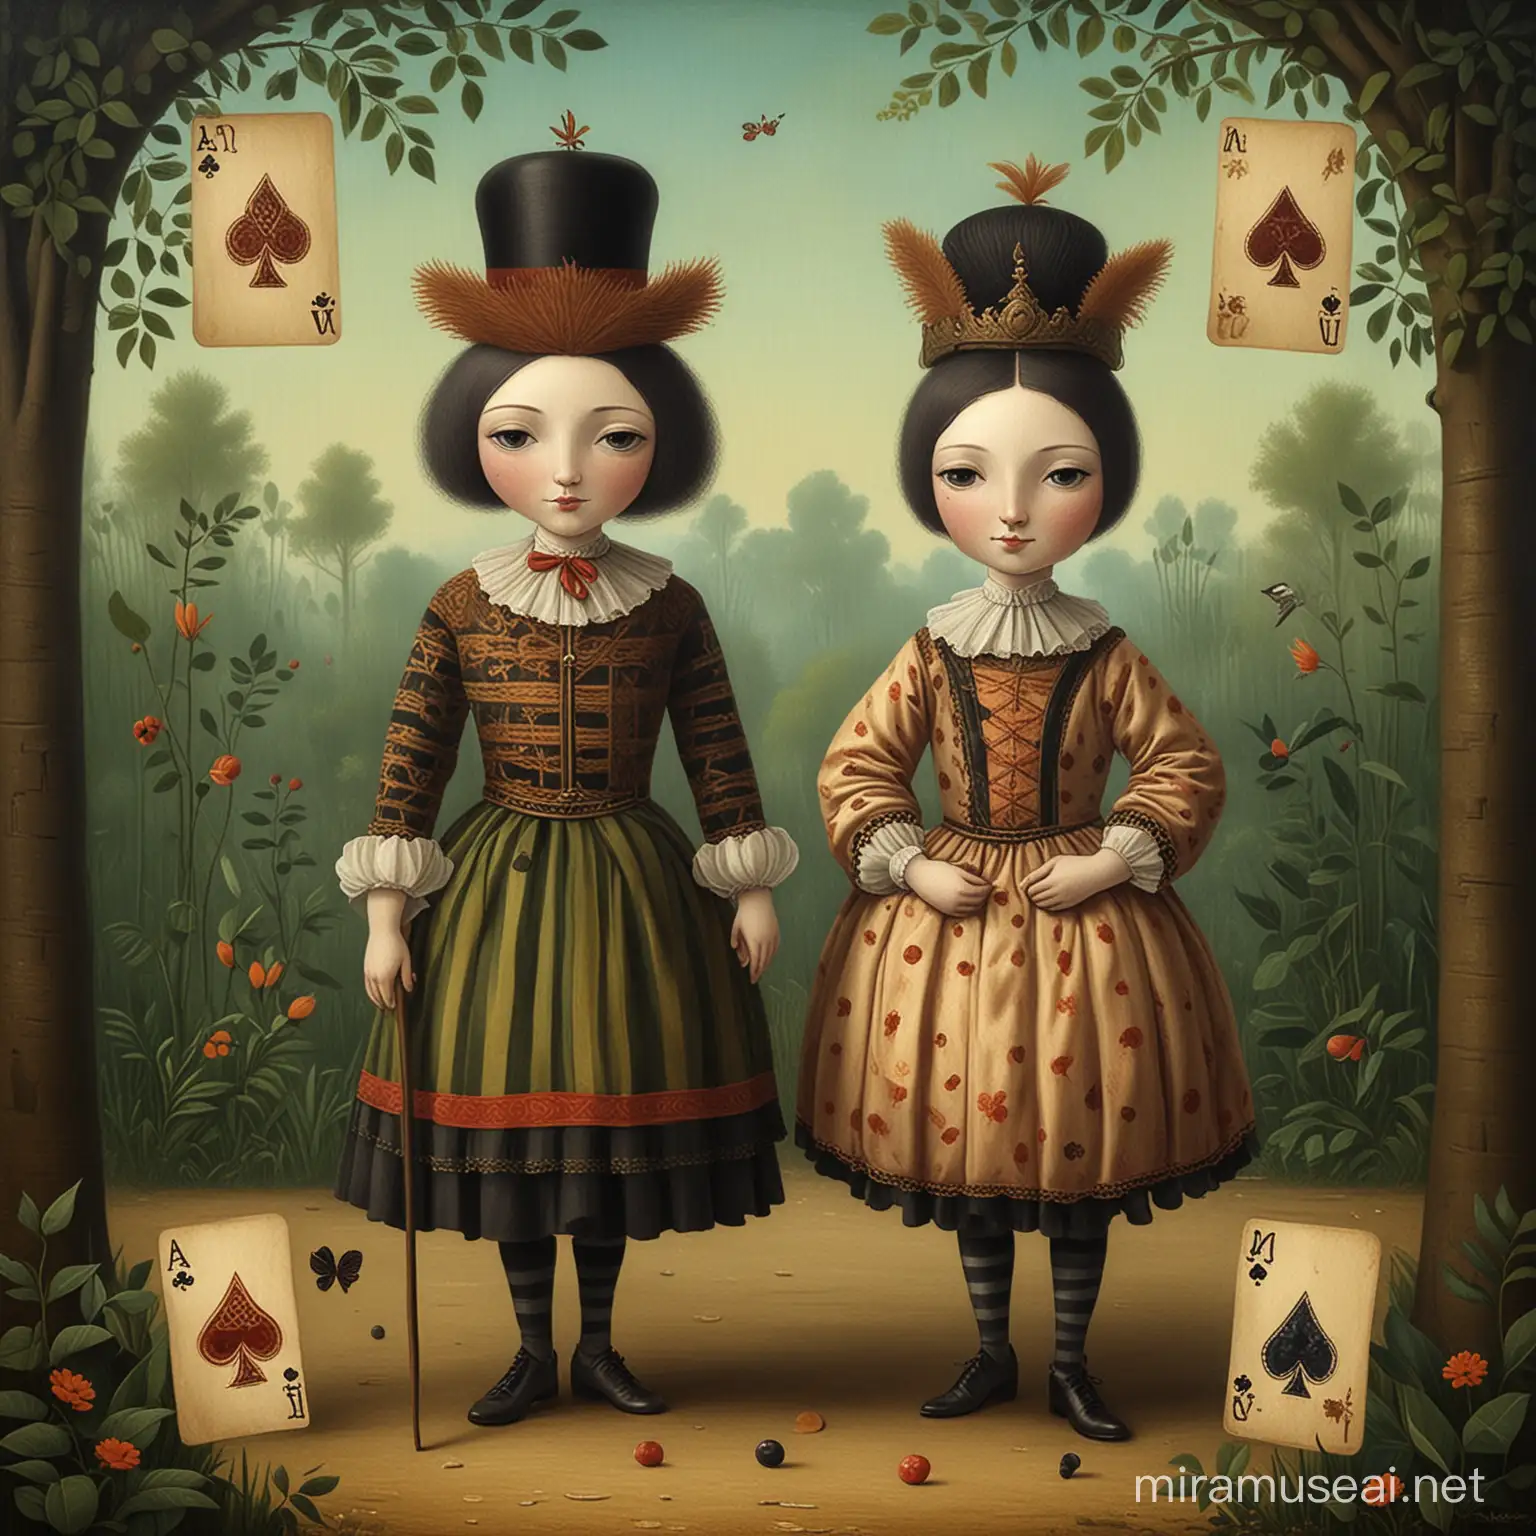 Card game images figures in renaissance costumes, king of clubs card figure with faces in the style of Inge Schuster, Nicoletta Ceccoli and Goro Fujita create a very painterly surrealistic painting wallart with brush strokes in the naive and primitive style of of Sergey Tarabanov, Iwona Lifsches,, Catrin Welz-Stein, in a primitive art style of Henri Rousseau , French post-impressionist painter in the Naïve or Primitive manner, npainted, stunning art painted, colors.